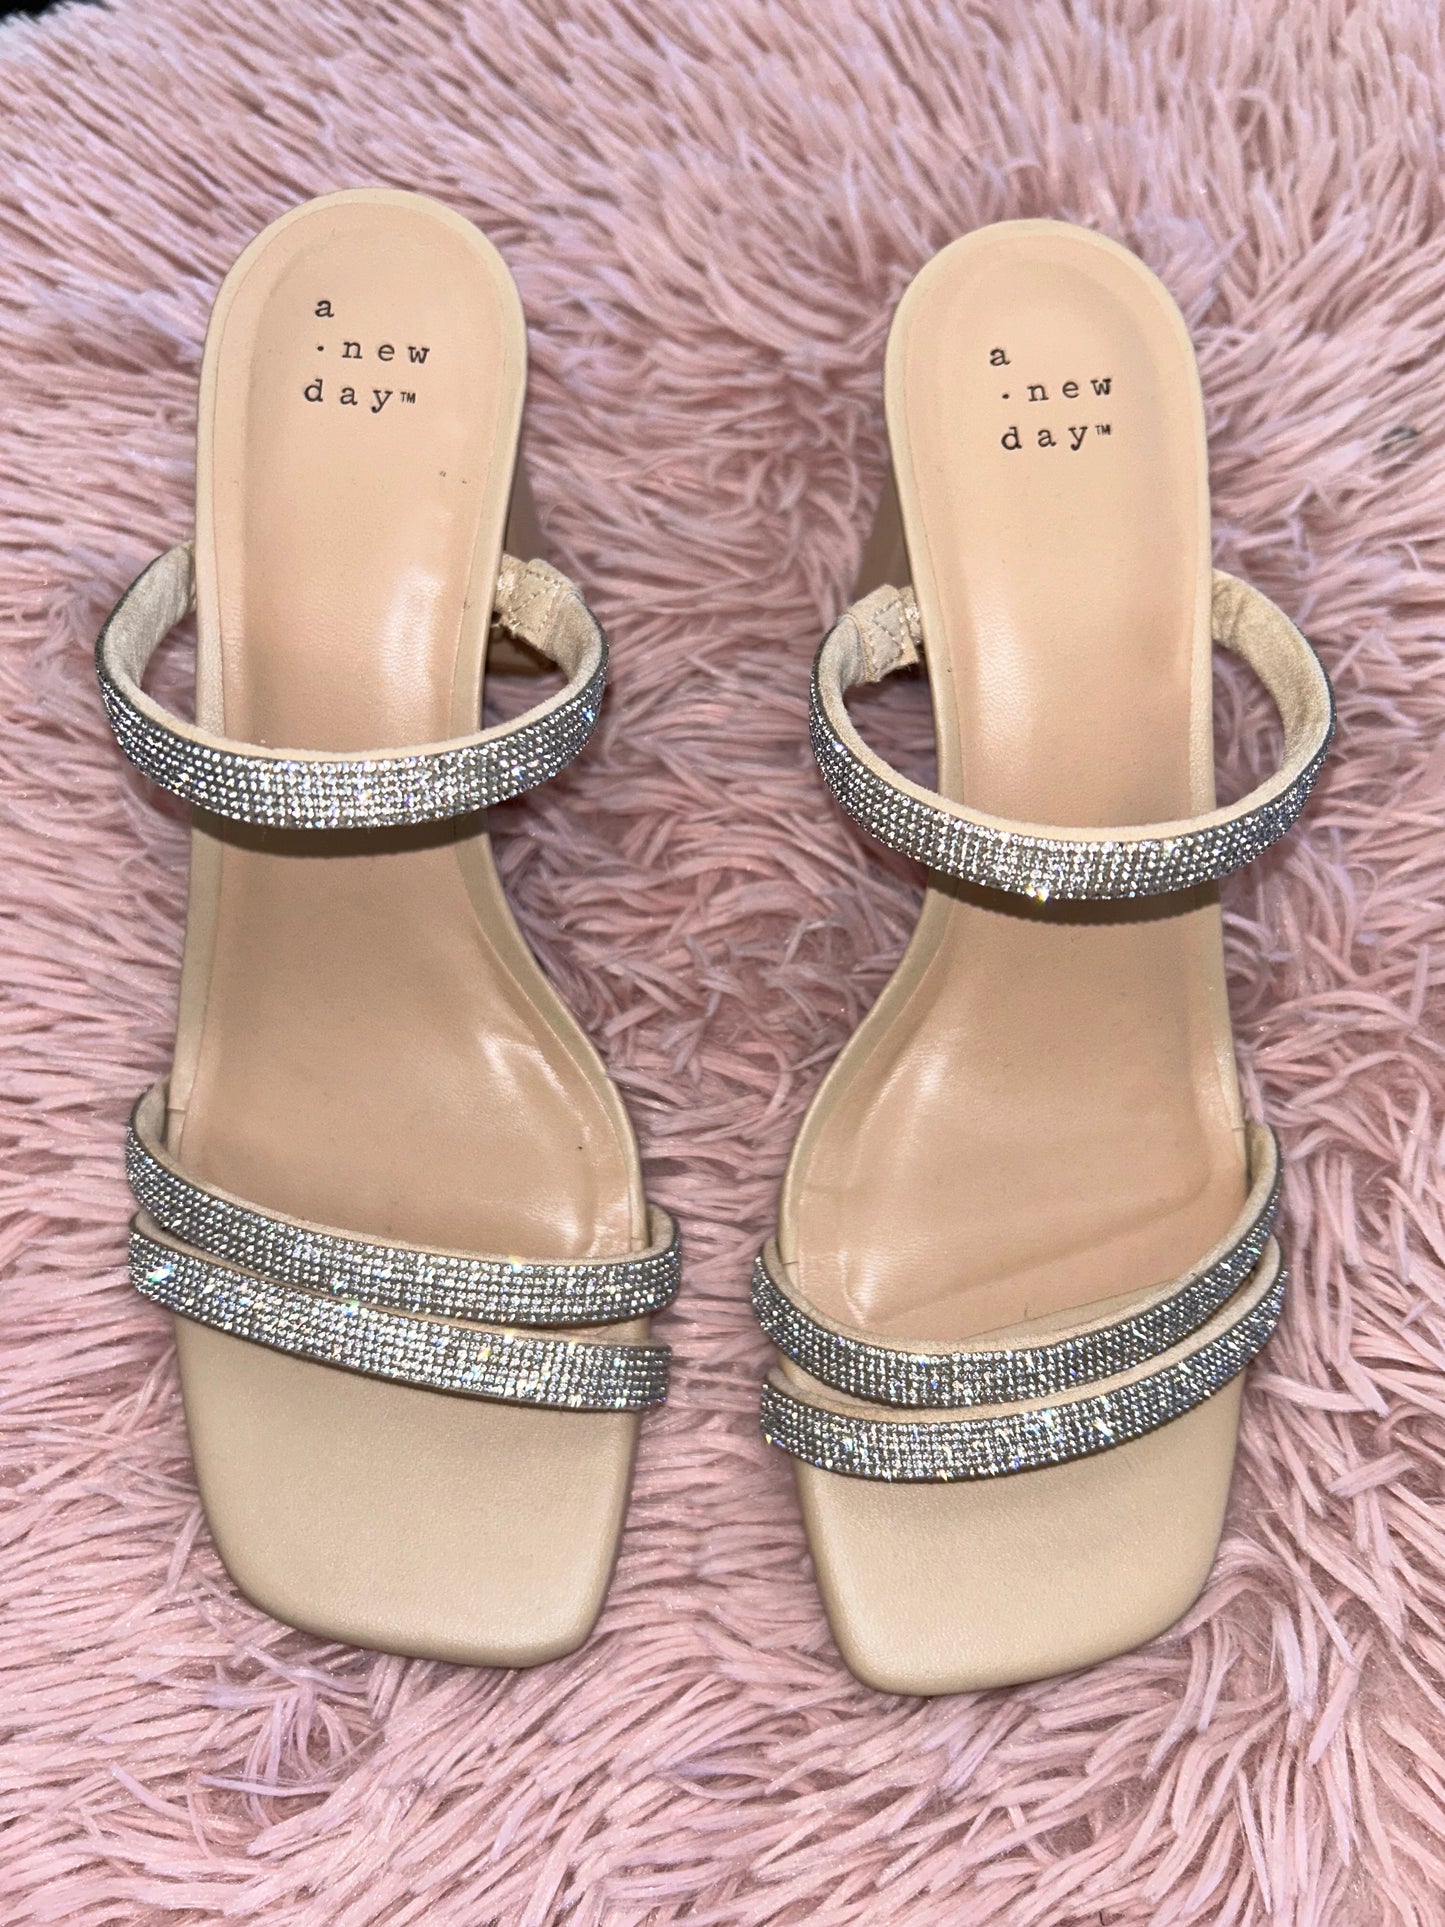 Diamond Shoes Heels Block A New Day, Size 8.5